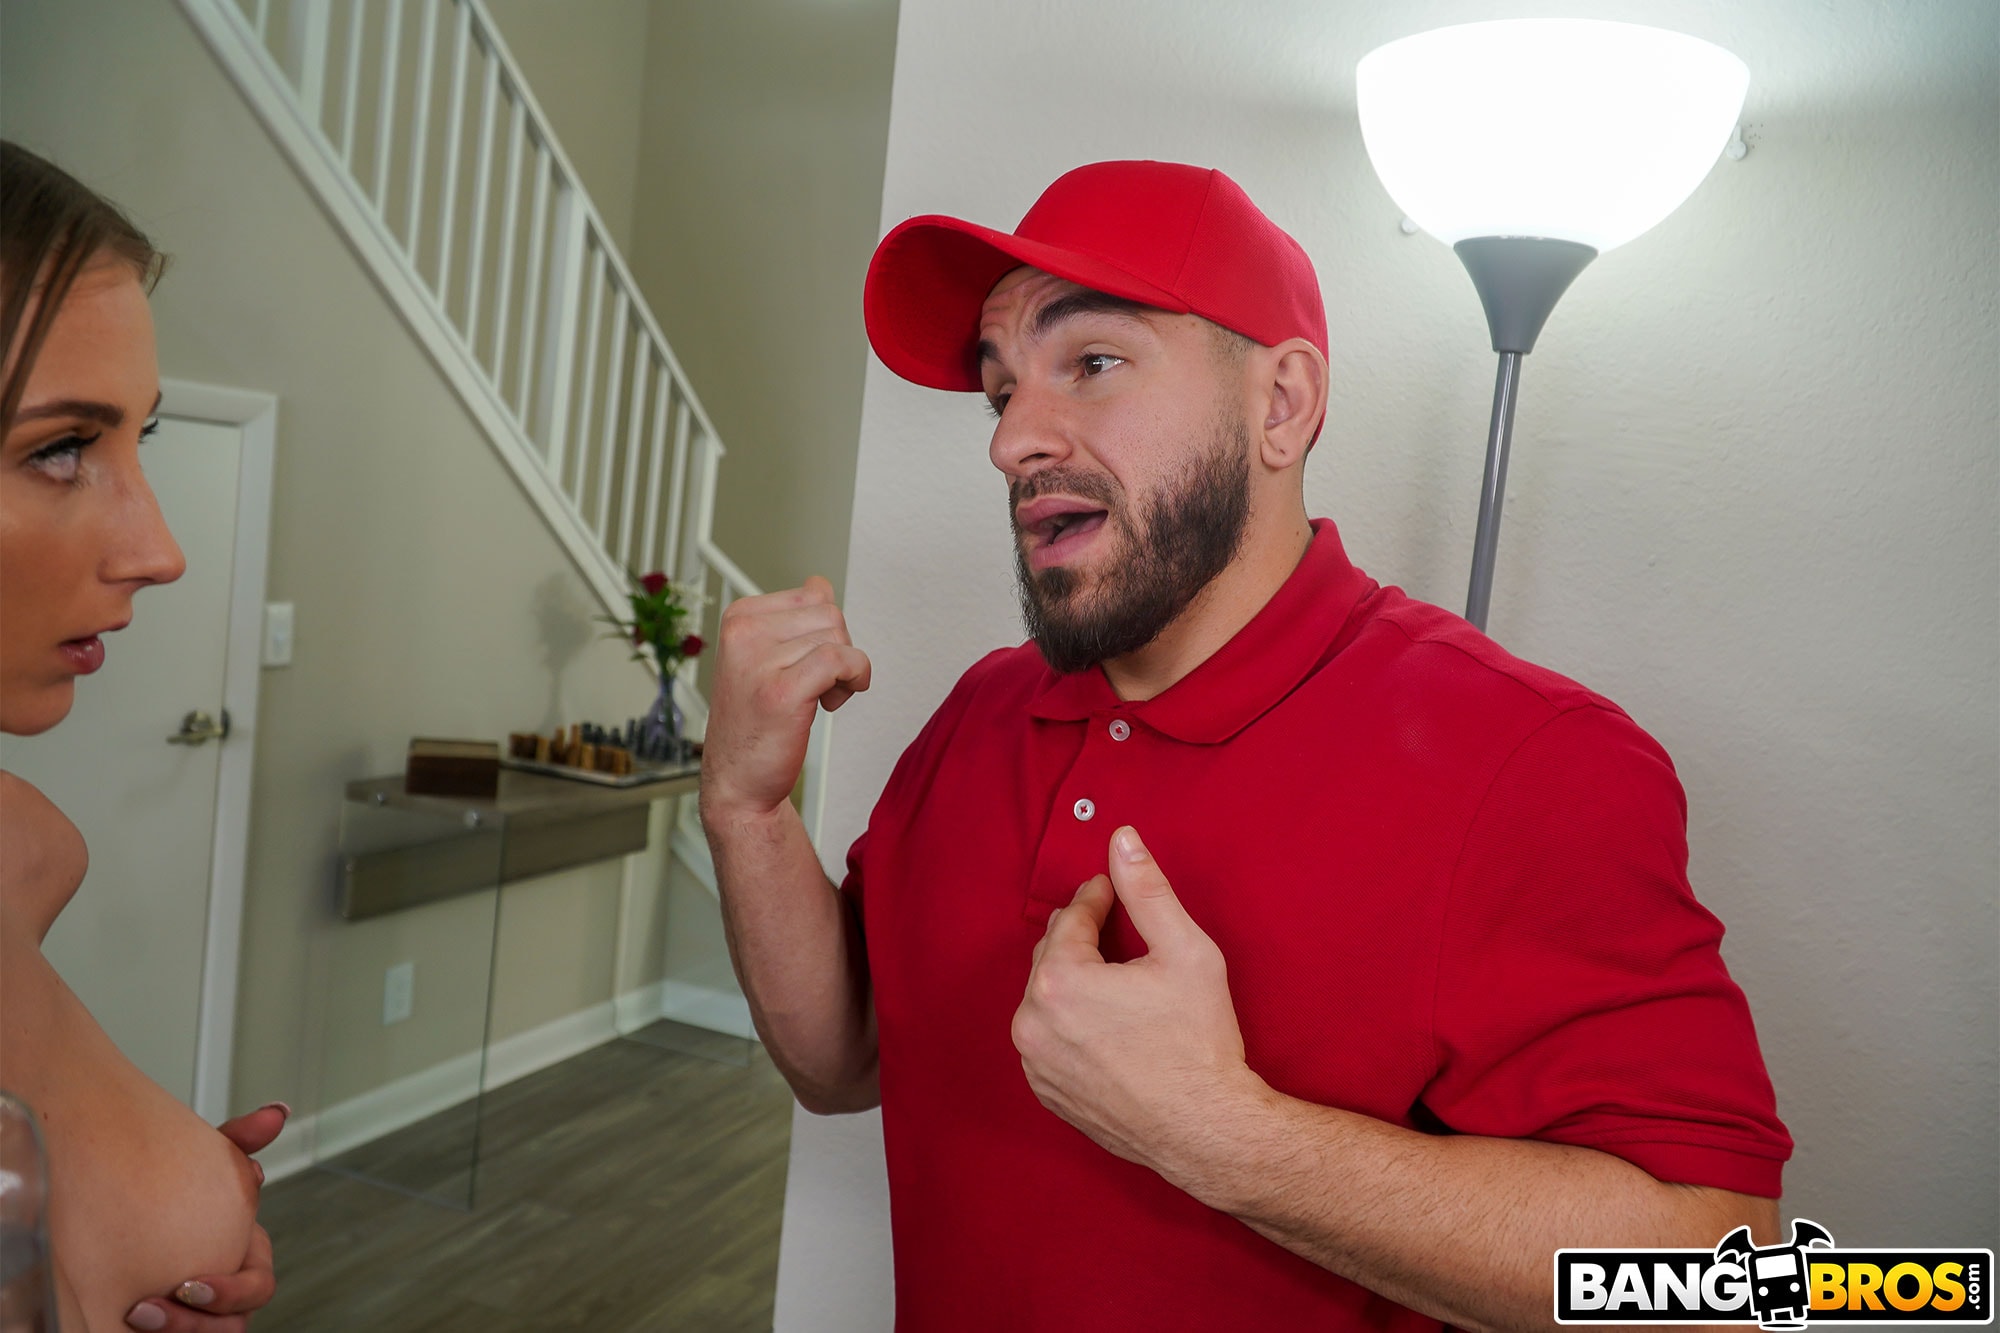 Bangbros 'Pizza Guy Caught in 4K' starring Macy Meadows (Photo 286)